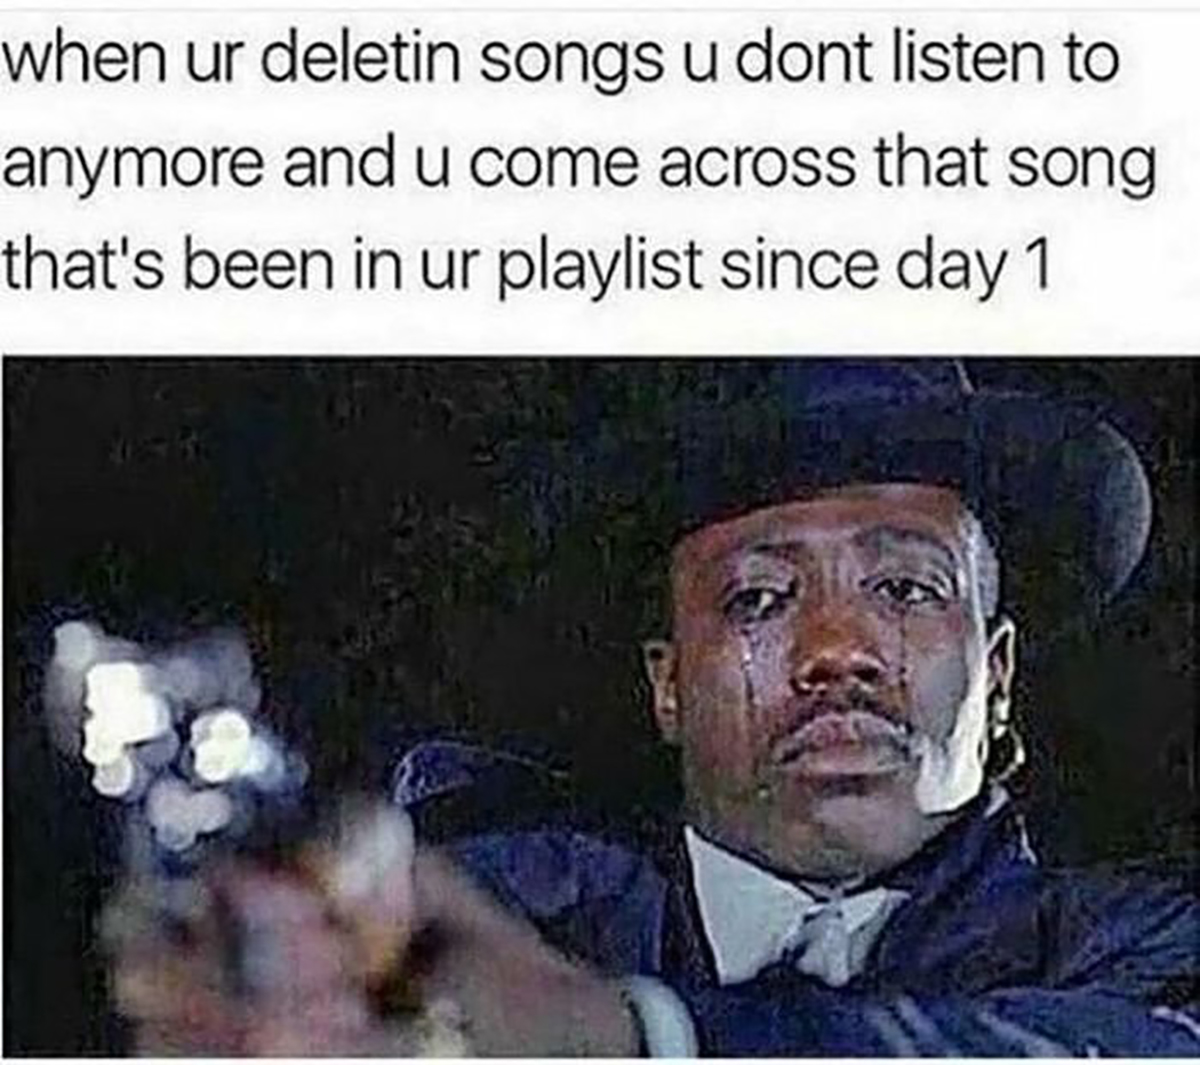 gaming memes - wesley snipes crying meme - when ur deletin songs u dont listen to anymore and u come across that song that's been in ur playlist since day 1